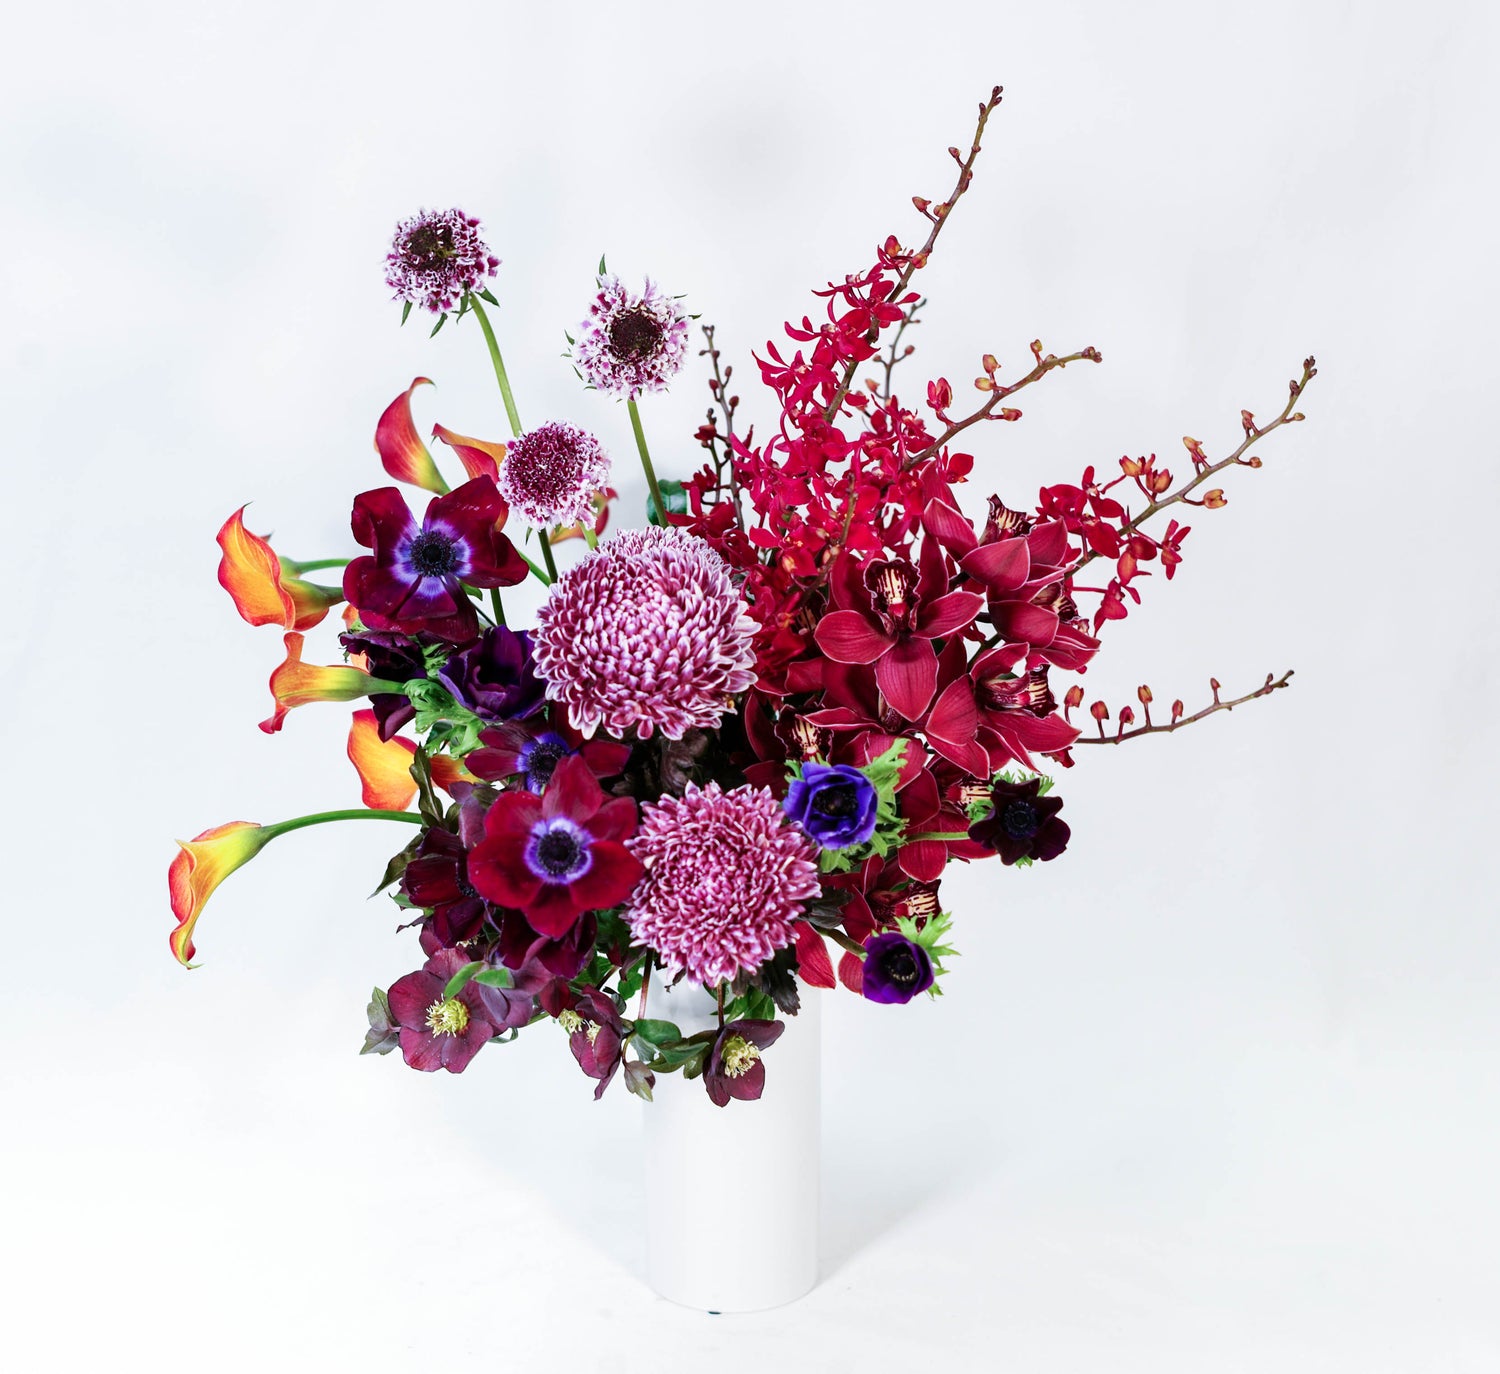 Jewel is a selection of flowers from the Sydney grower